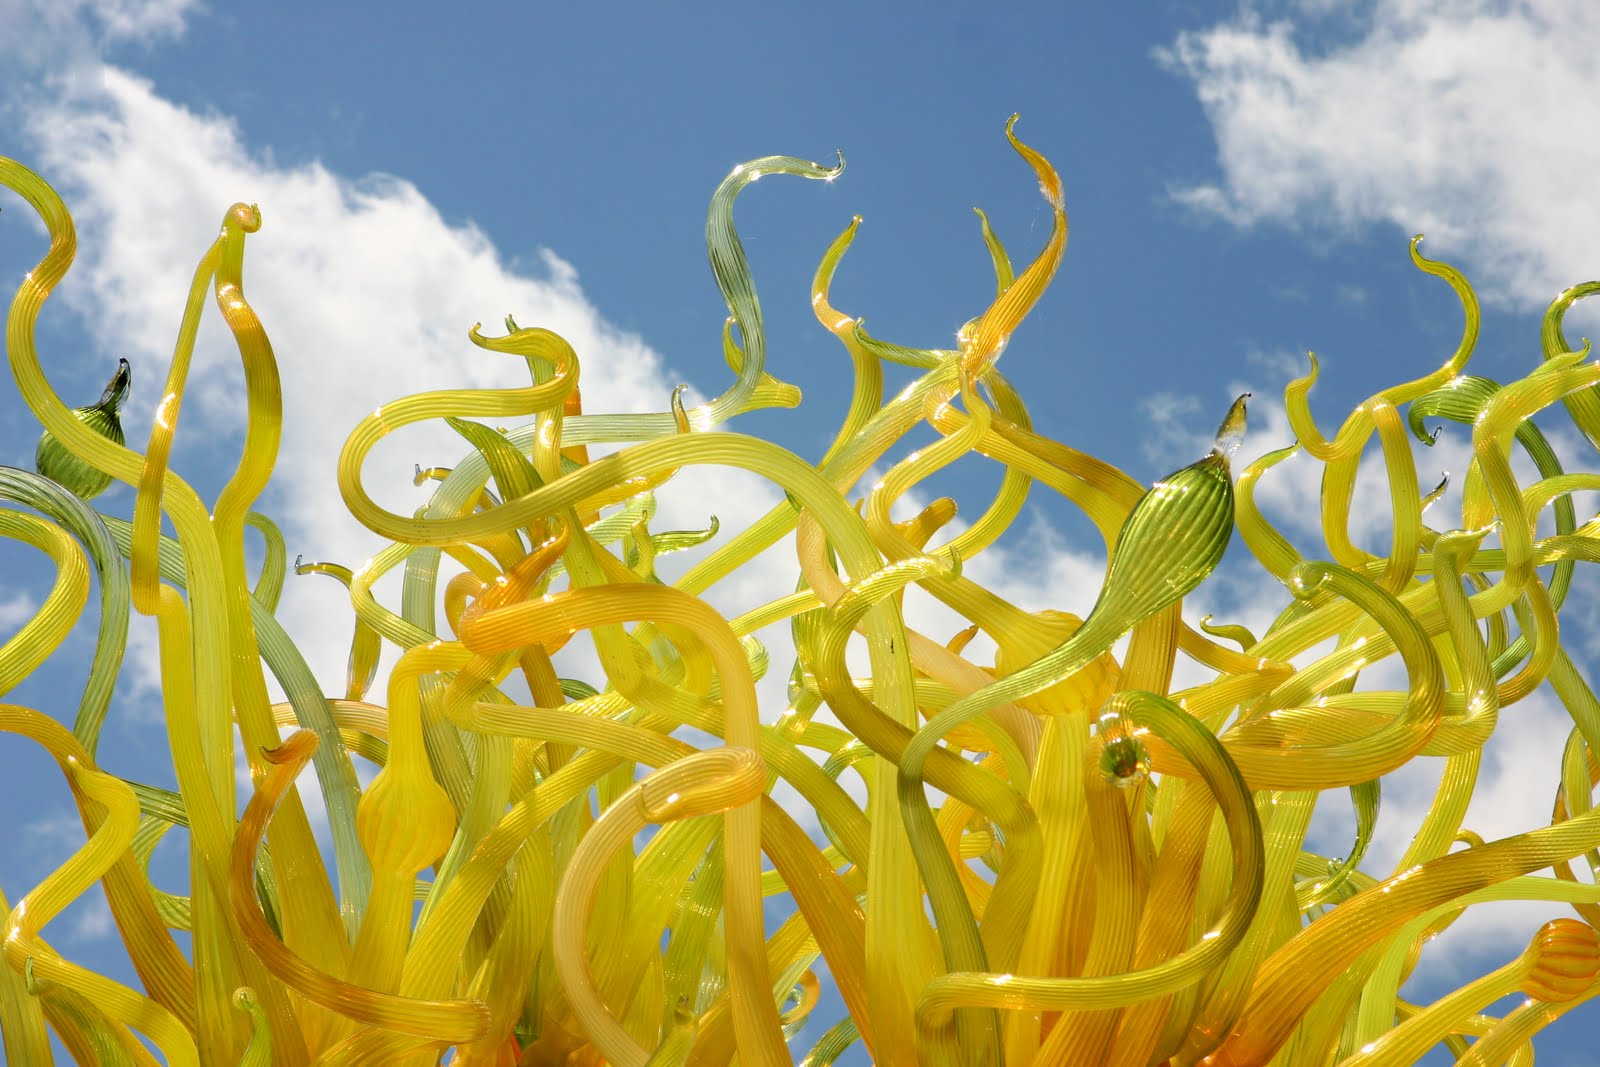 Scarlett Design: Chihuly at the St. Louis Botanical Garden